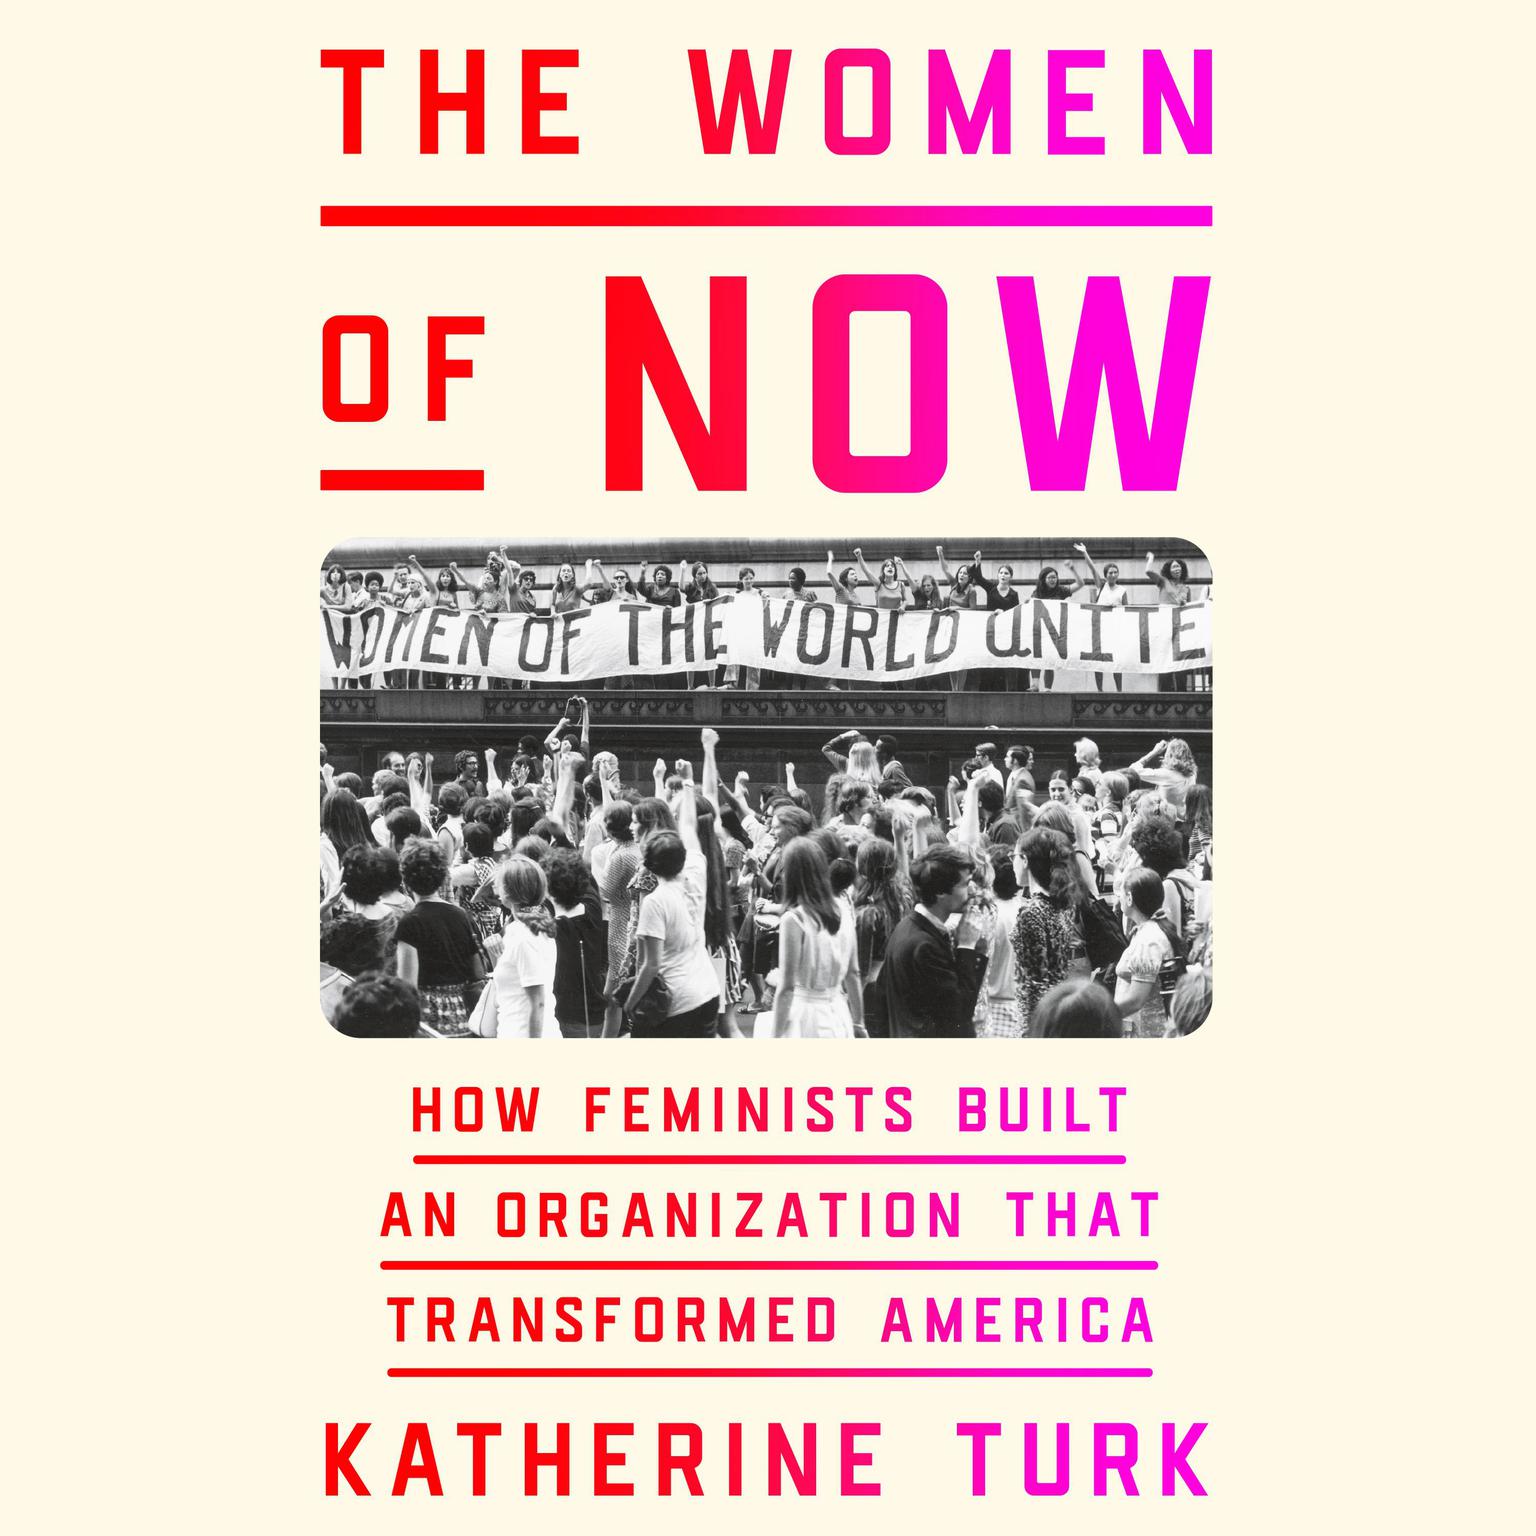 The Women of NOW: How Feminists Built an Organization That Transformed America Audiobook, by Katherine Turk